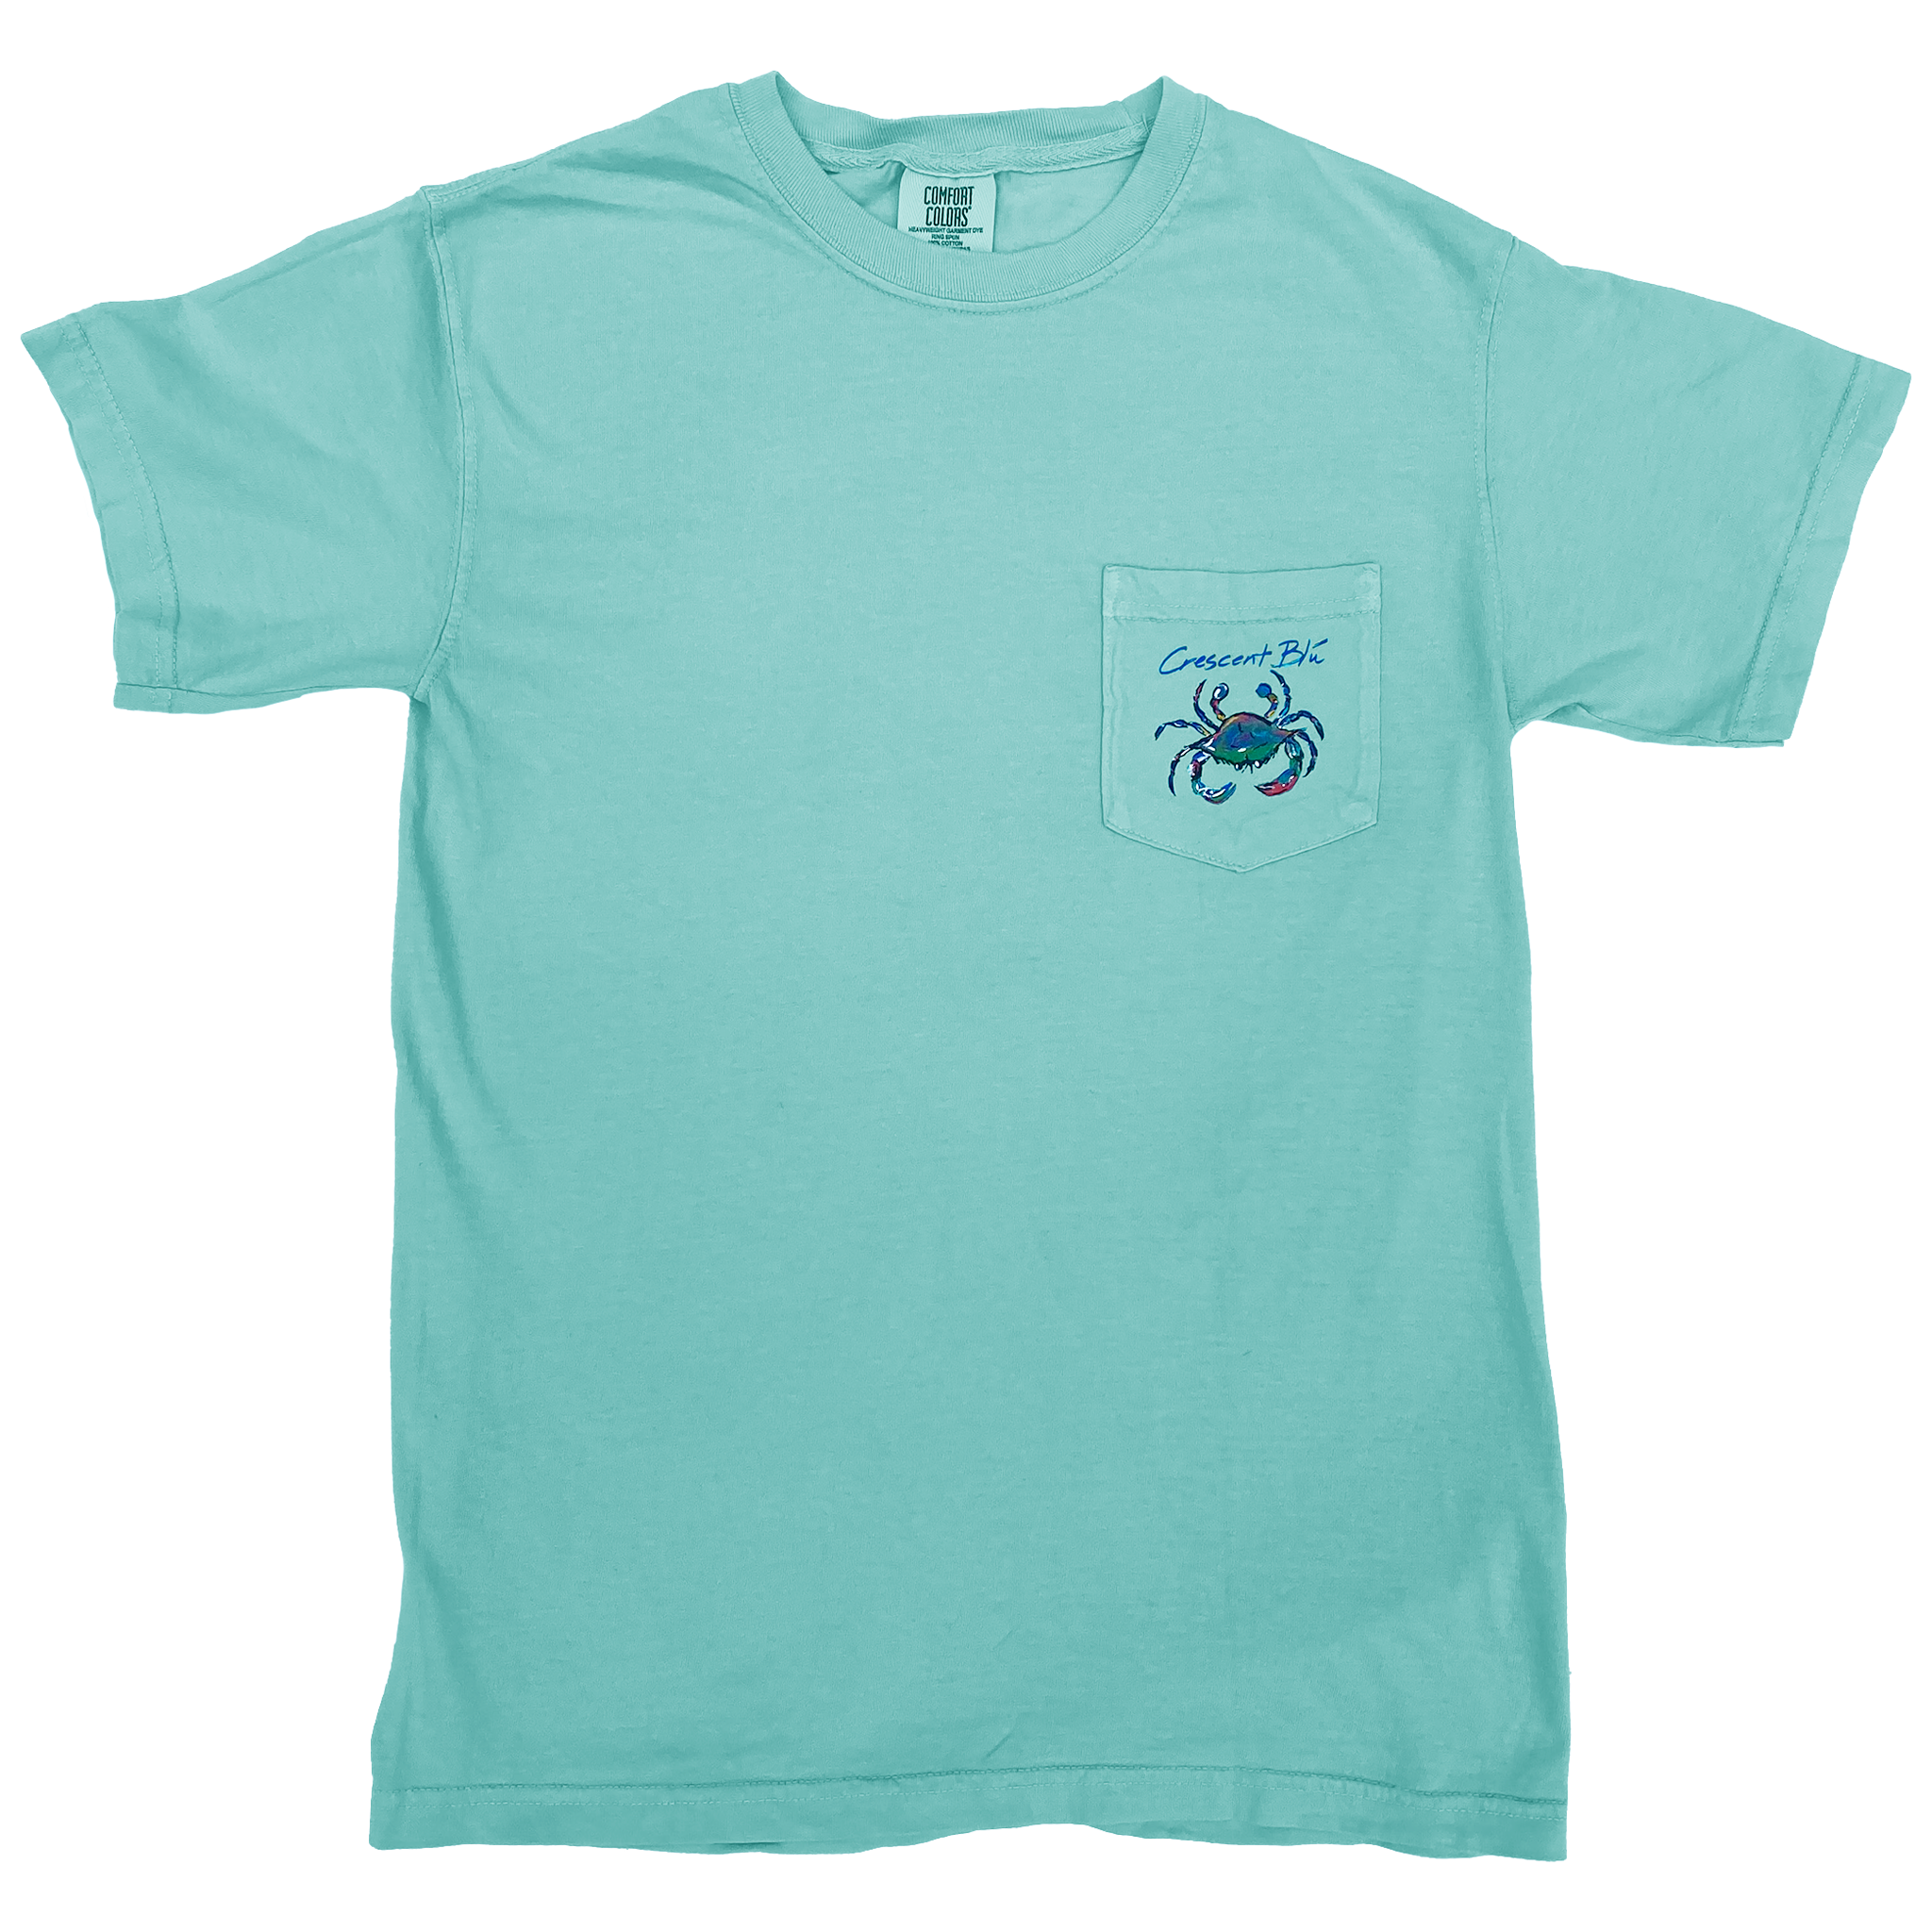 Front view of an adult short sleeve t-shirt with the words "Crescent Blu" and a small Crescent Blu Signature crab logo printed on the front left chest pocket